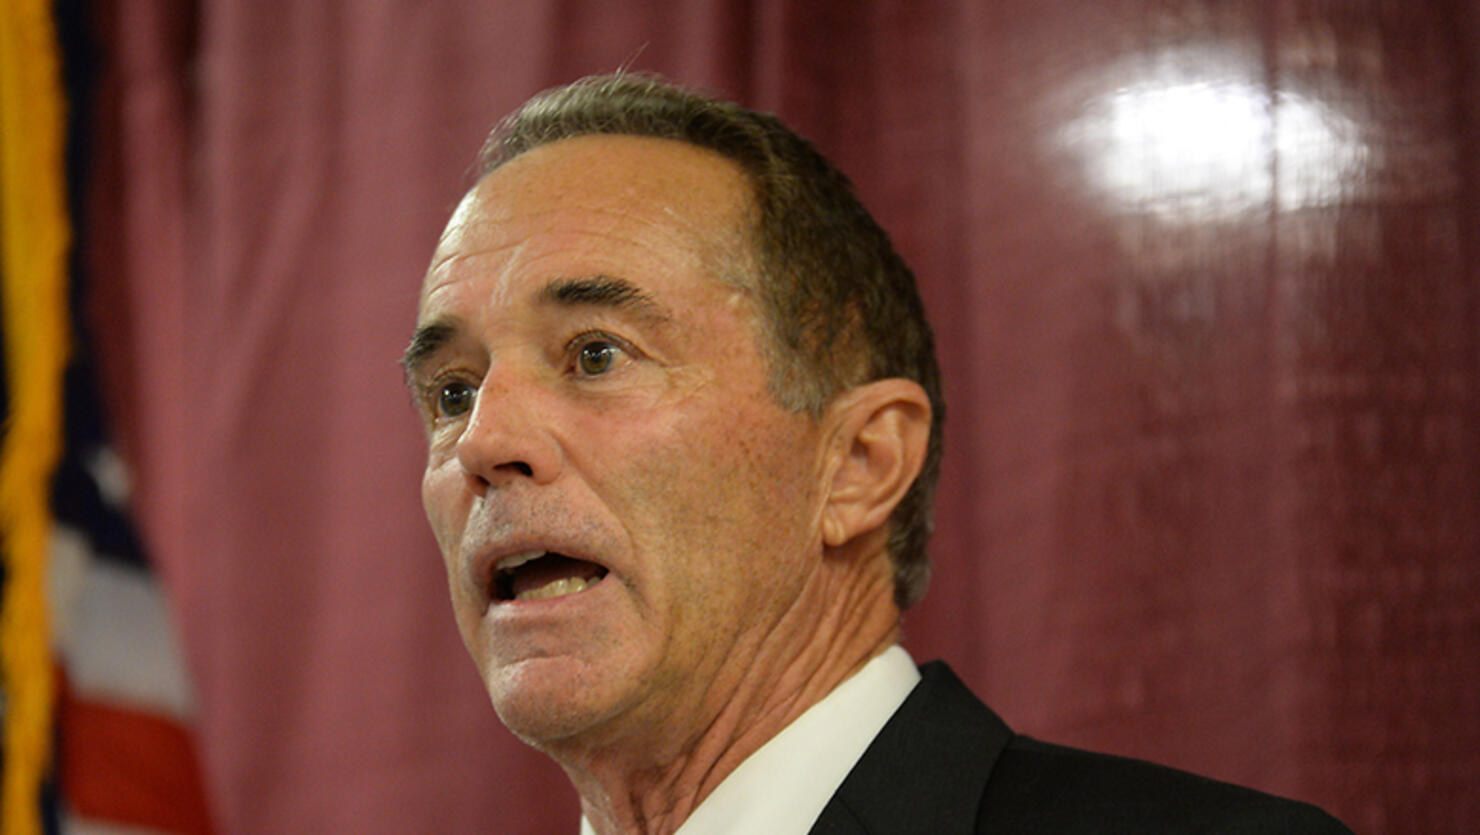 Rep. Chris Collins Holds A Press conference